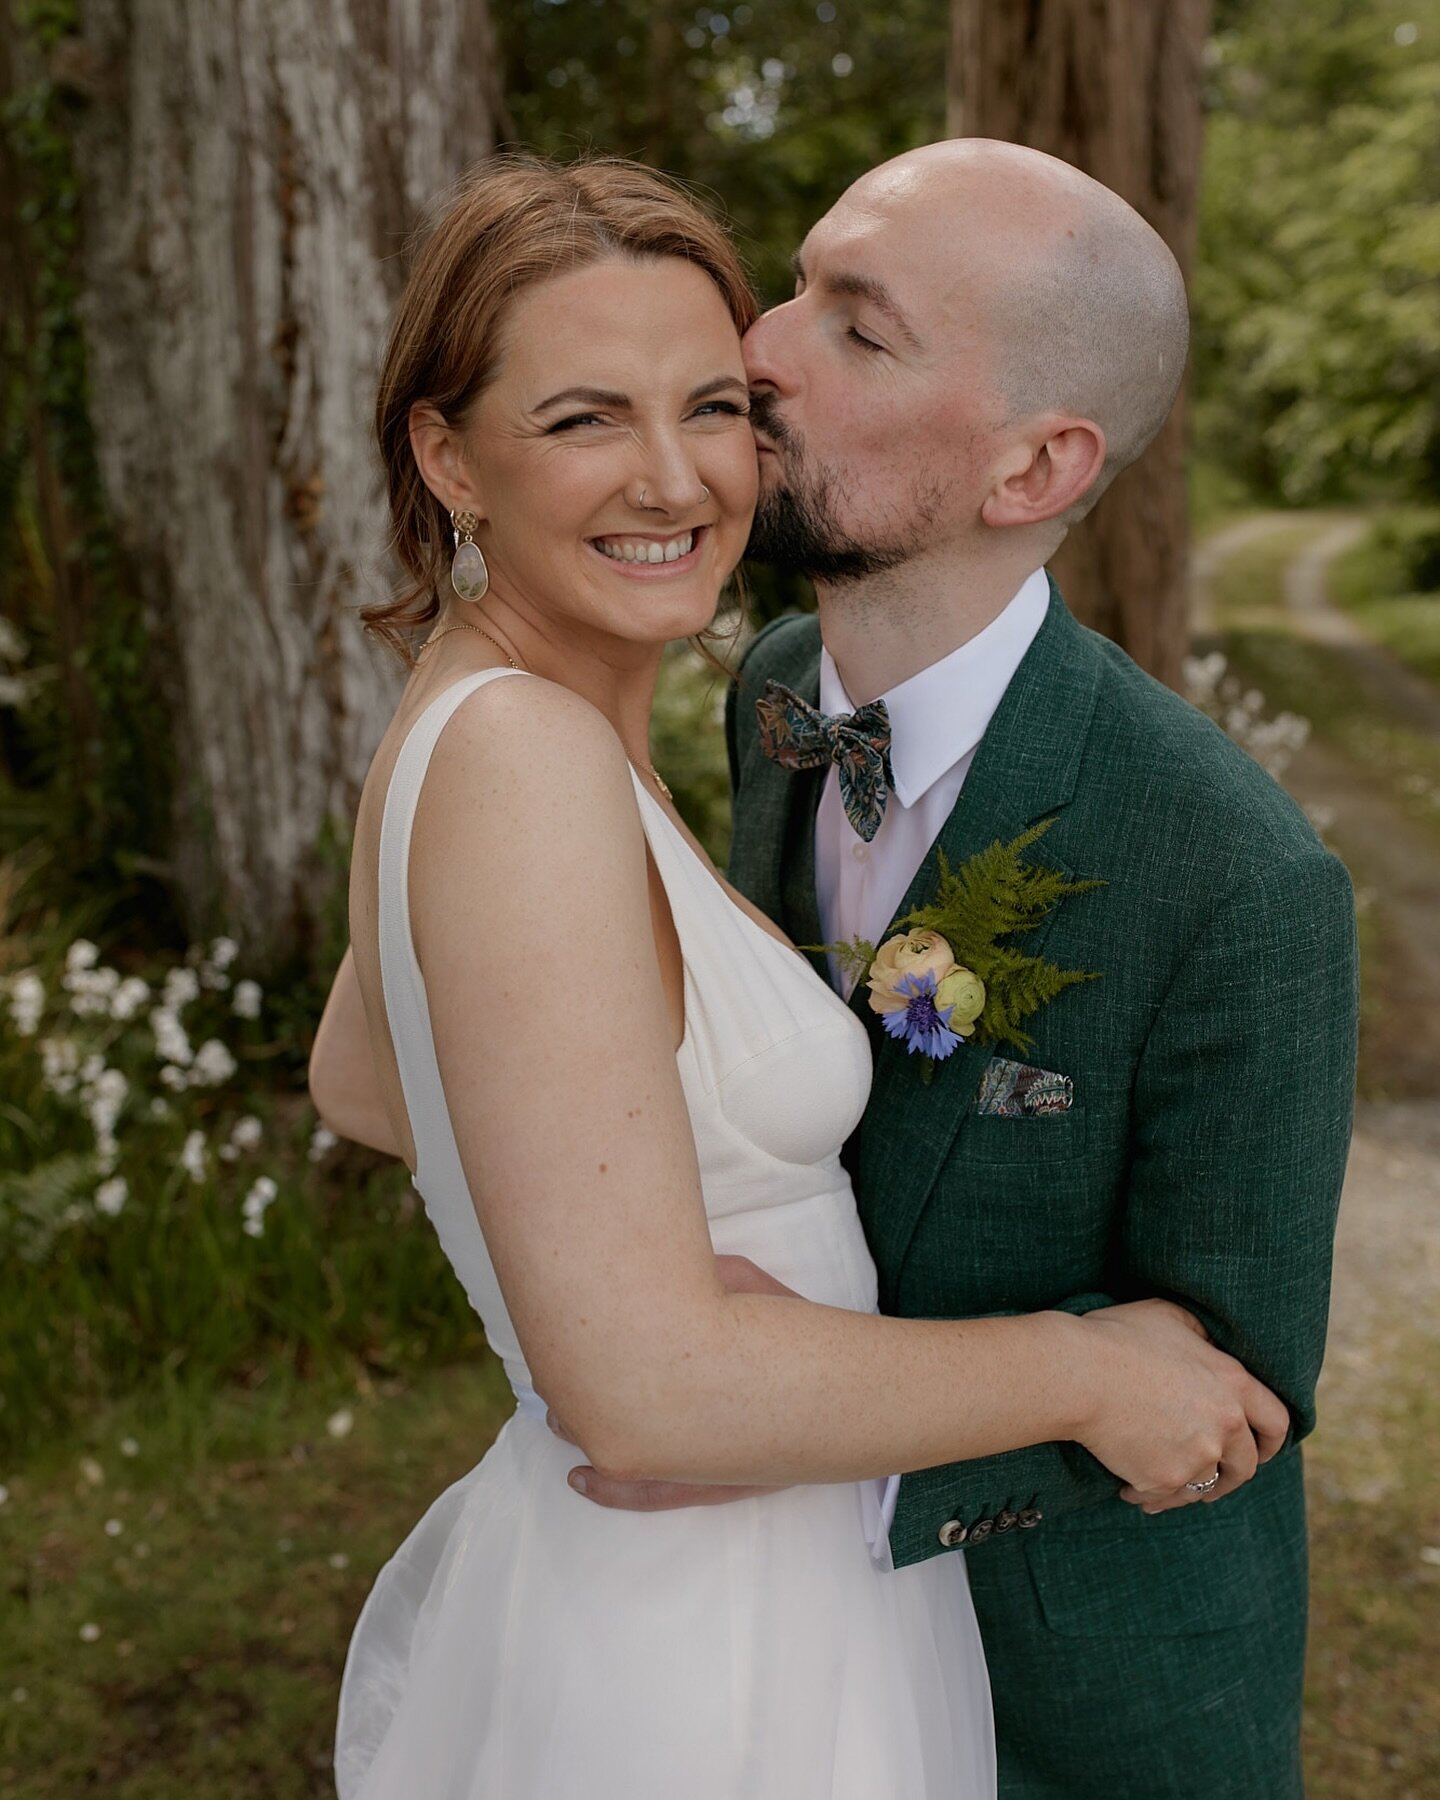 Inish Beg Estate is the perfect spot for a first look and couple photos before the ceremony. You have free rein of the grounds before your guests arrive, which means you can spend even more time enjoying your drinks reception. Win win! 🎉

#corkphoto